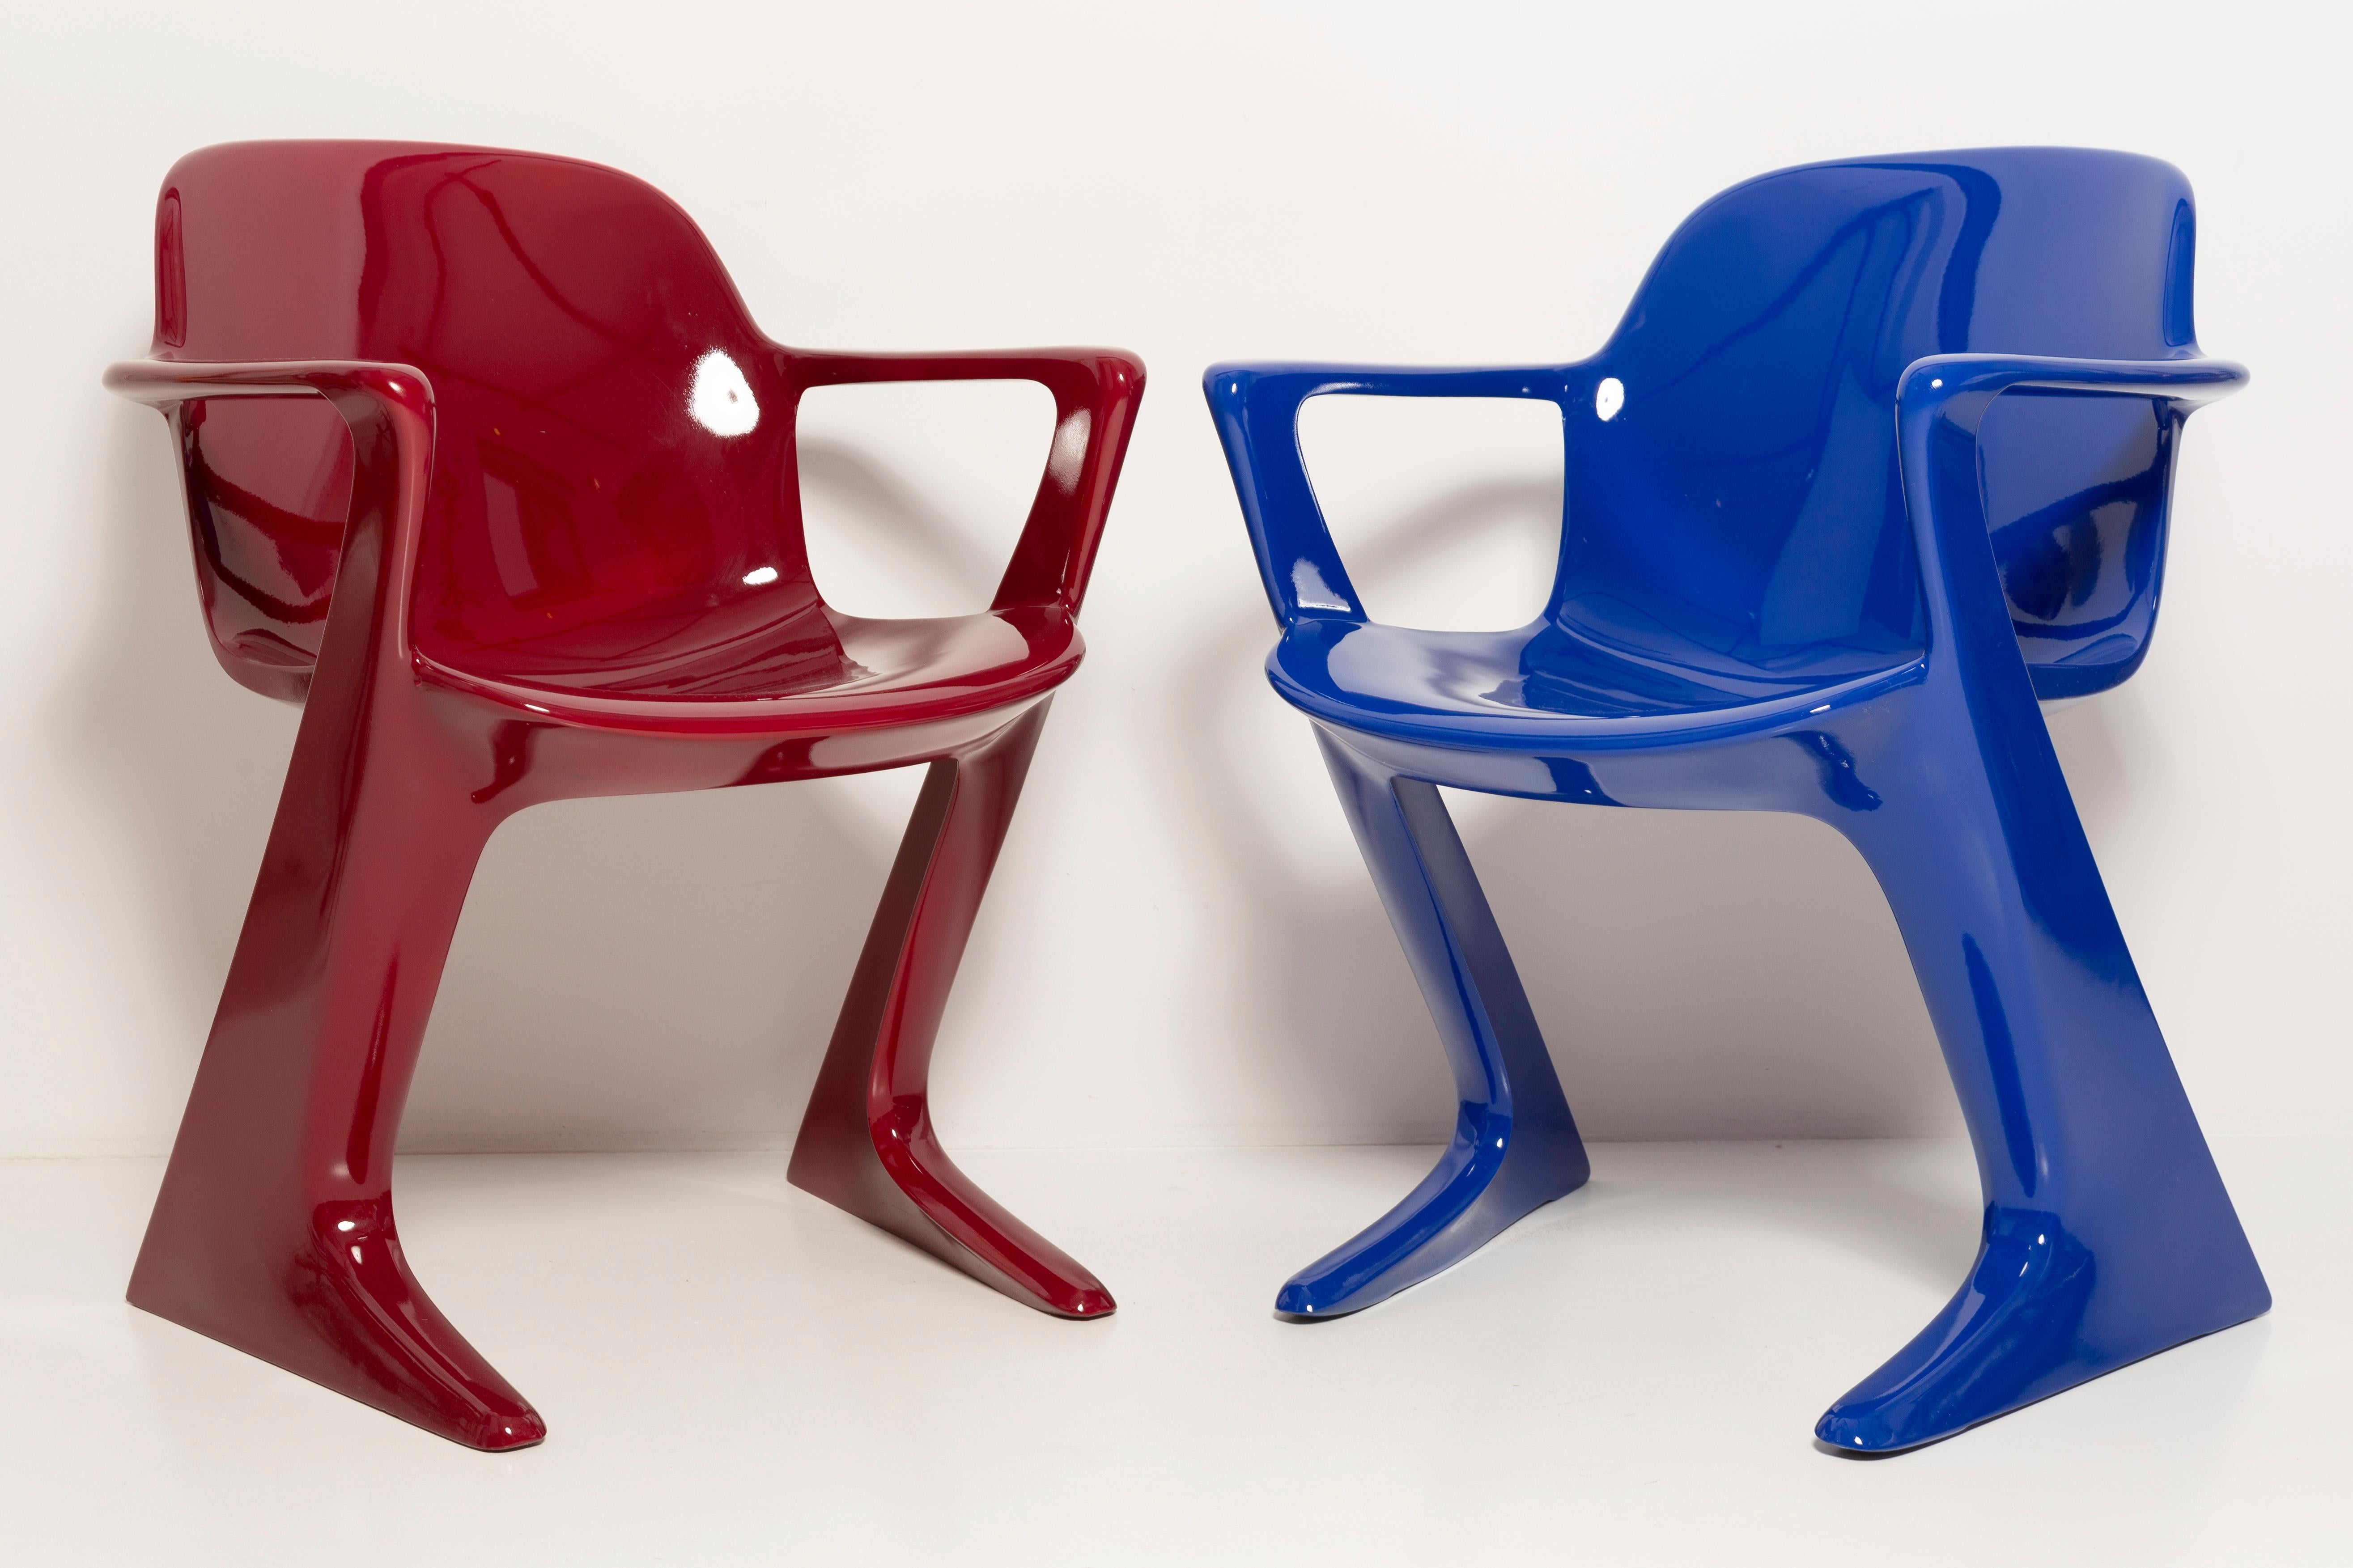 Two Mid-Century Burgundy Red and Blue Kangaroo Chairs Ernst Moeckl Germany, 1968 In Excellent Condition For Sale In 05-080 Hornowek, PL